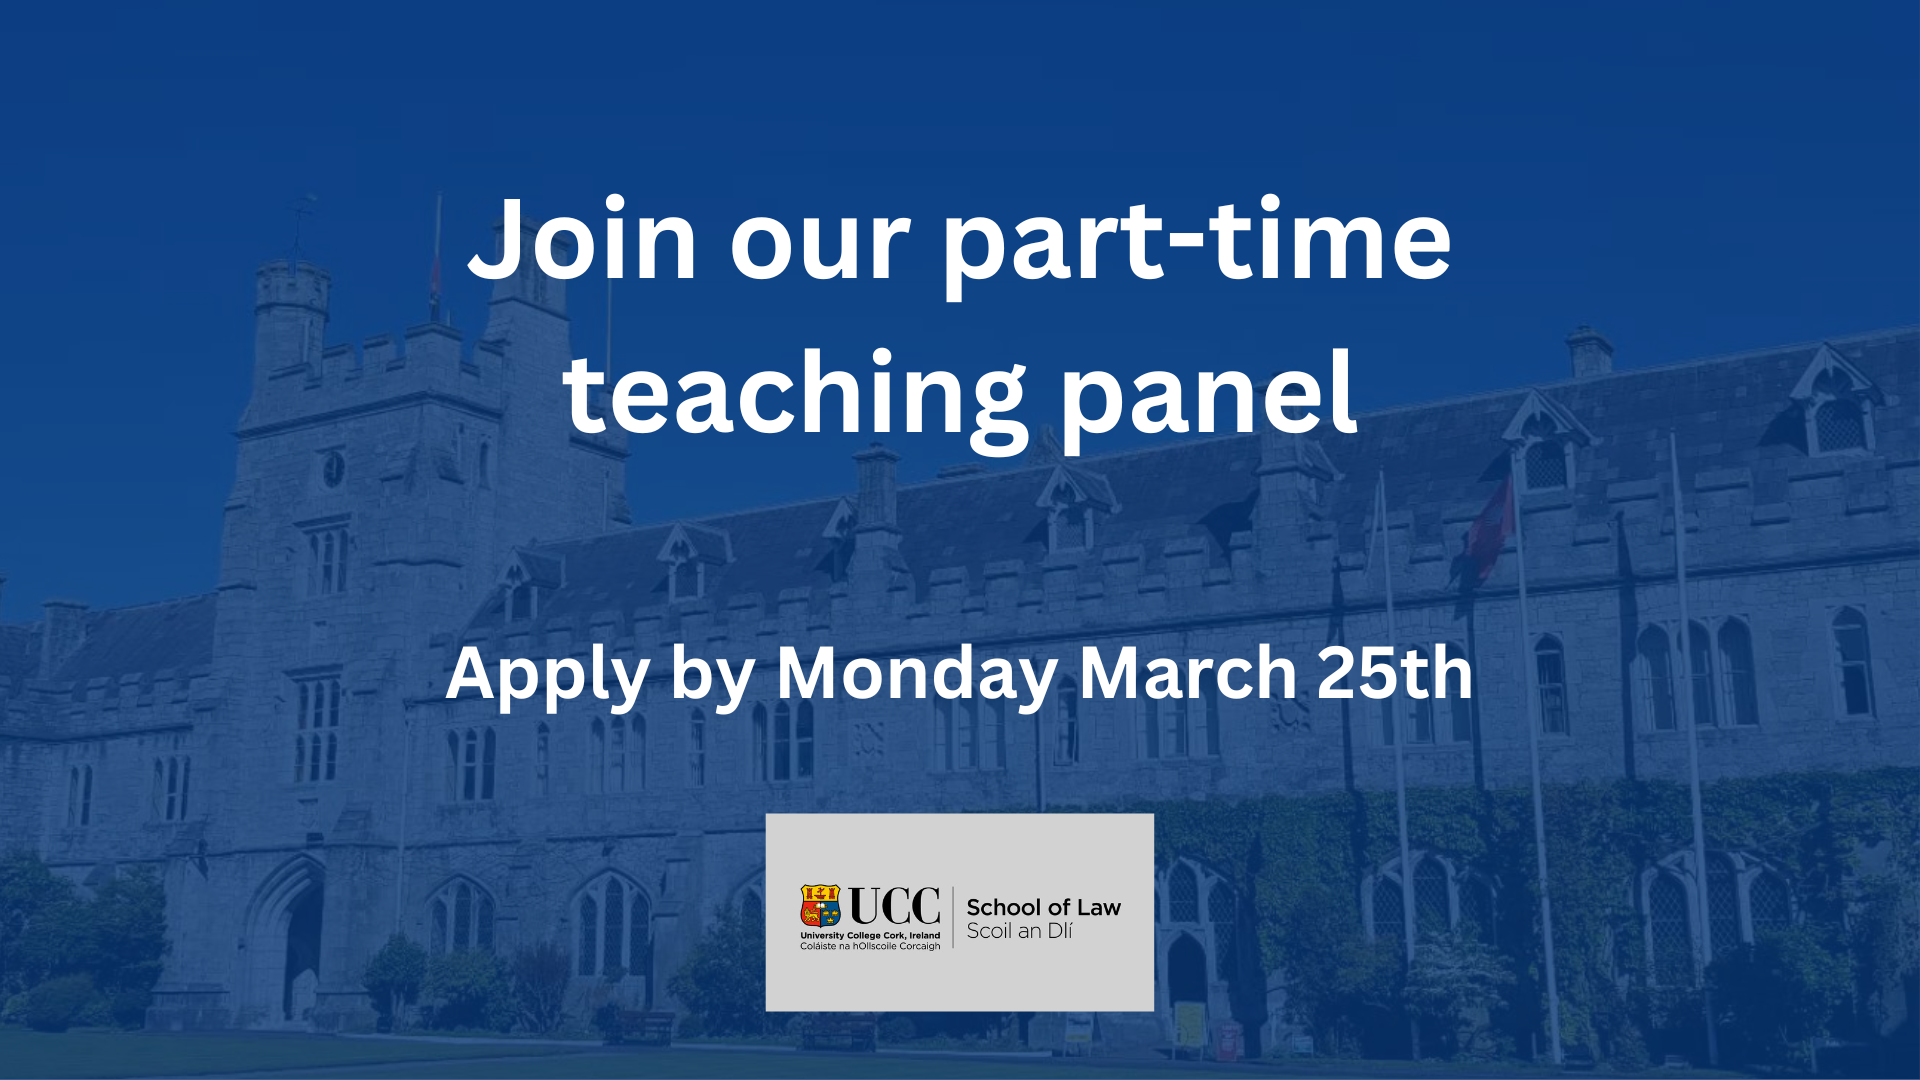 Join the UCC School of Law part-time teaching panel
